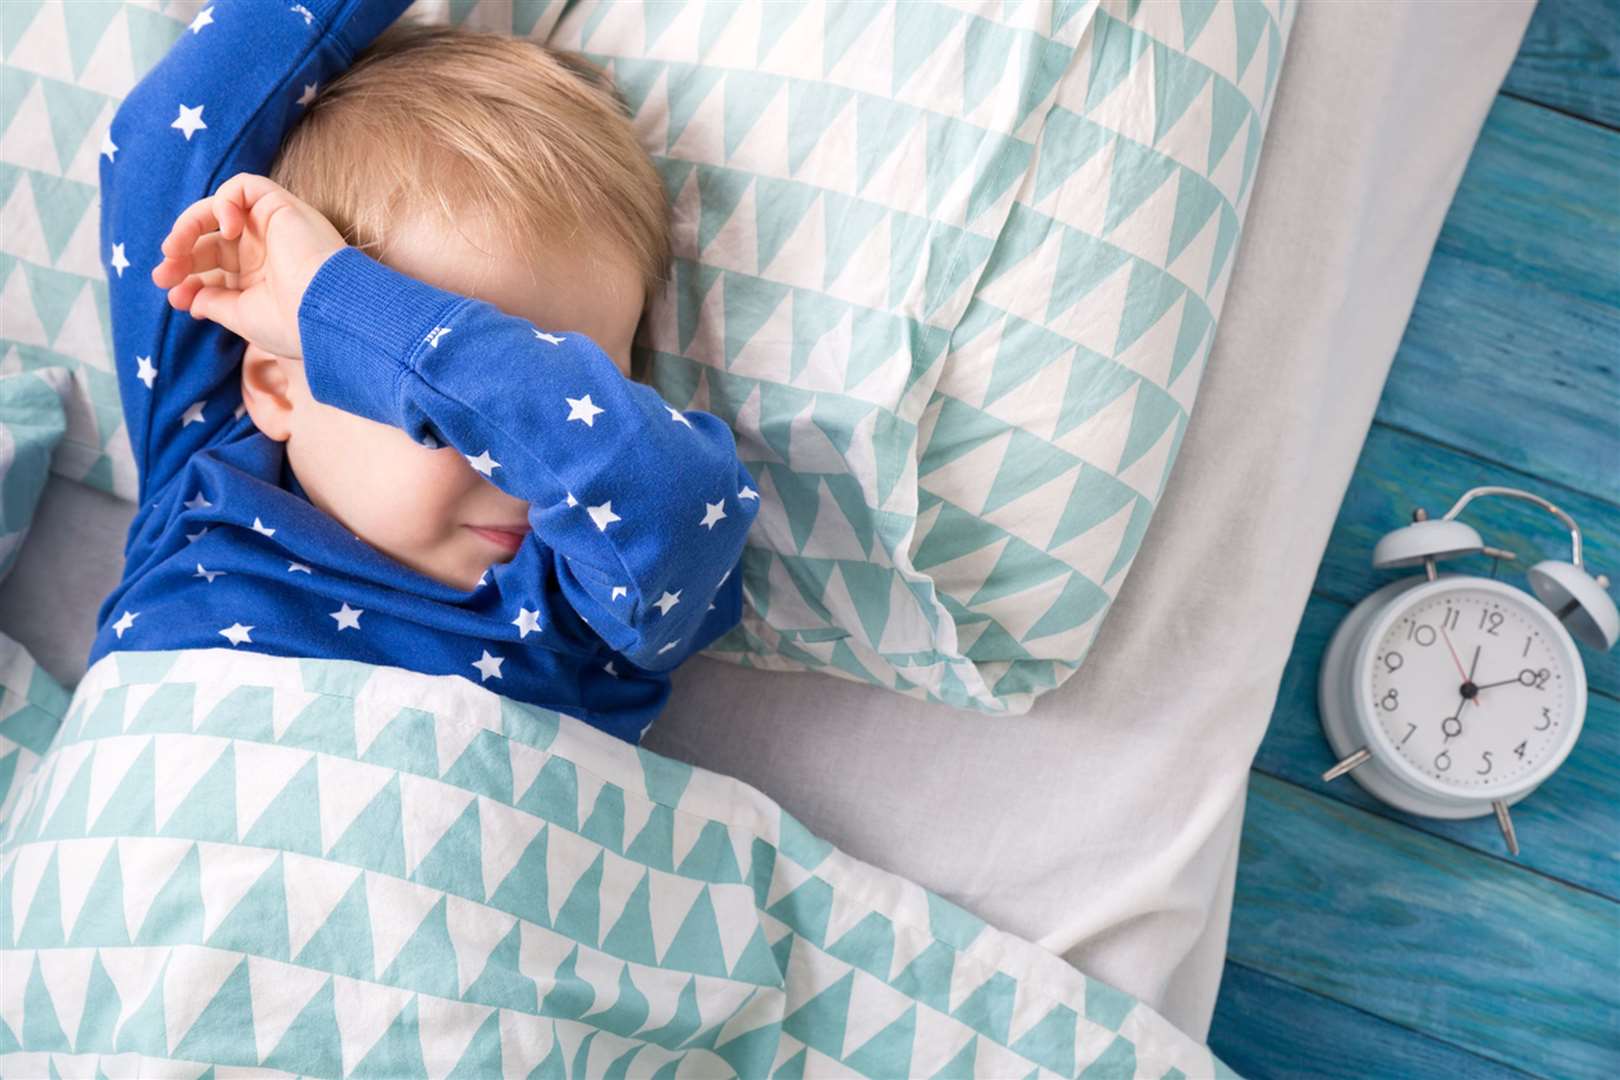 An hour less in bed can be hugely disruptive to a child's sleep patterns